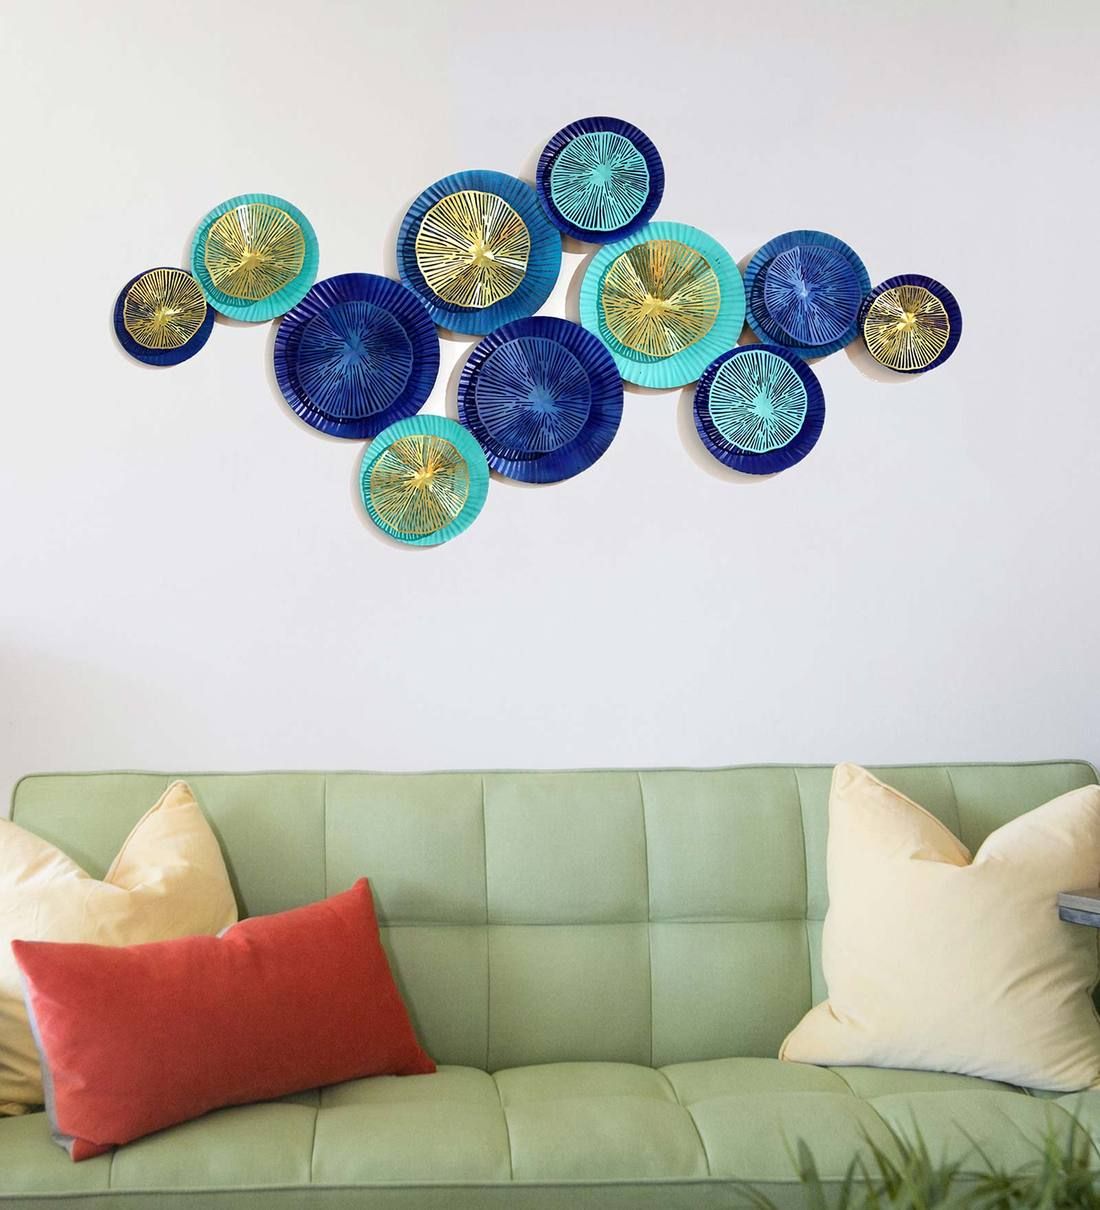 Buy Beautiful Aqua Circle Metal Wall Hanging Art Online – Kraphy Pertaining To Most Recently Released Glossy Circle Metal Wall Art (View 17 of 20)